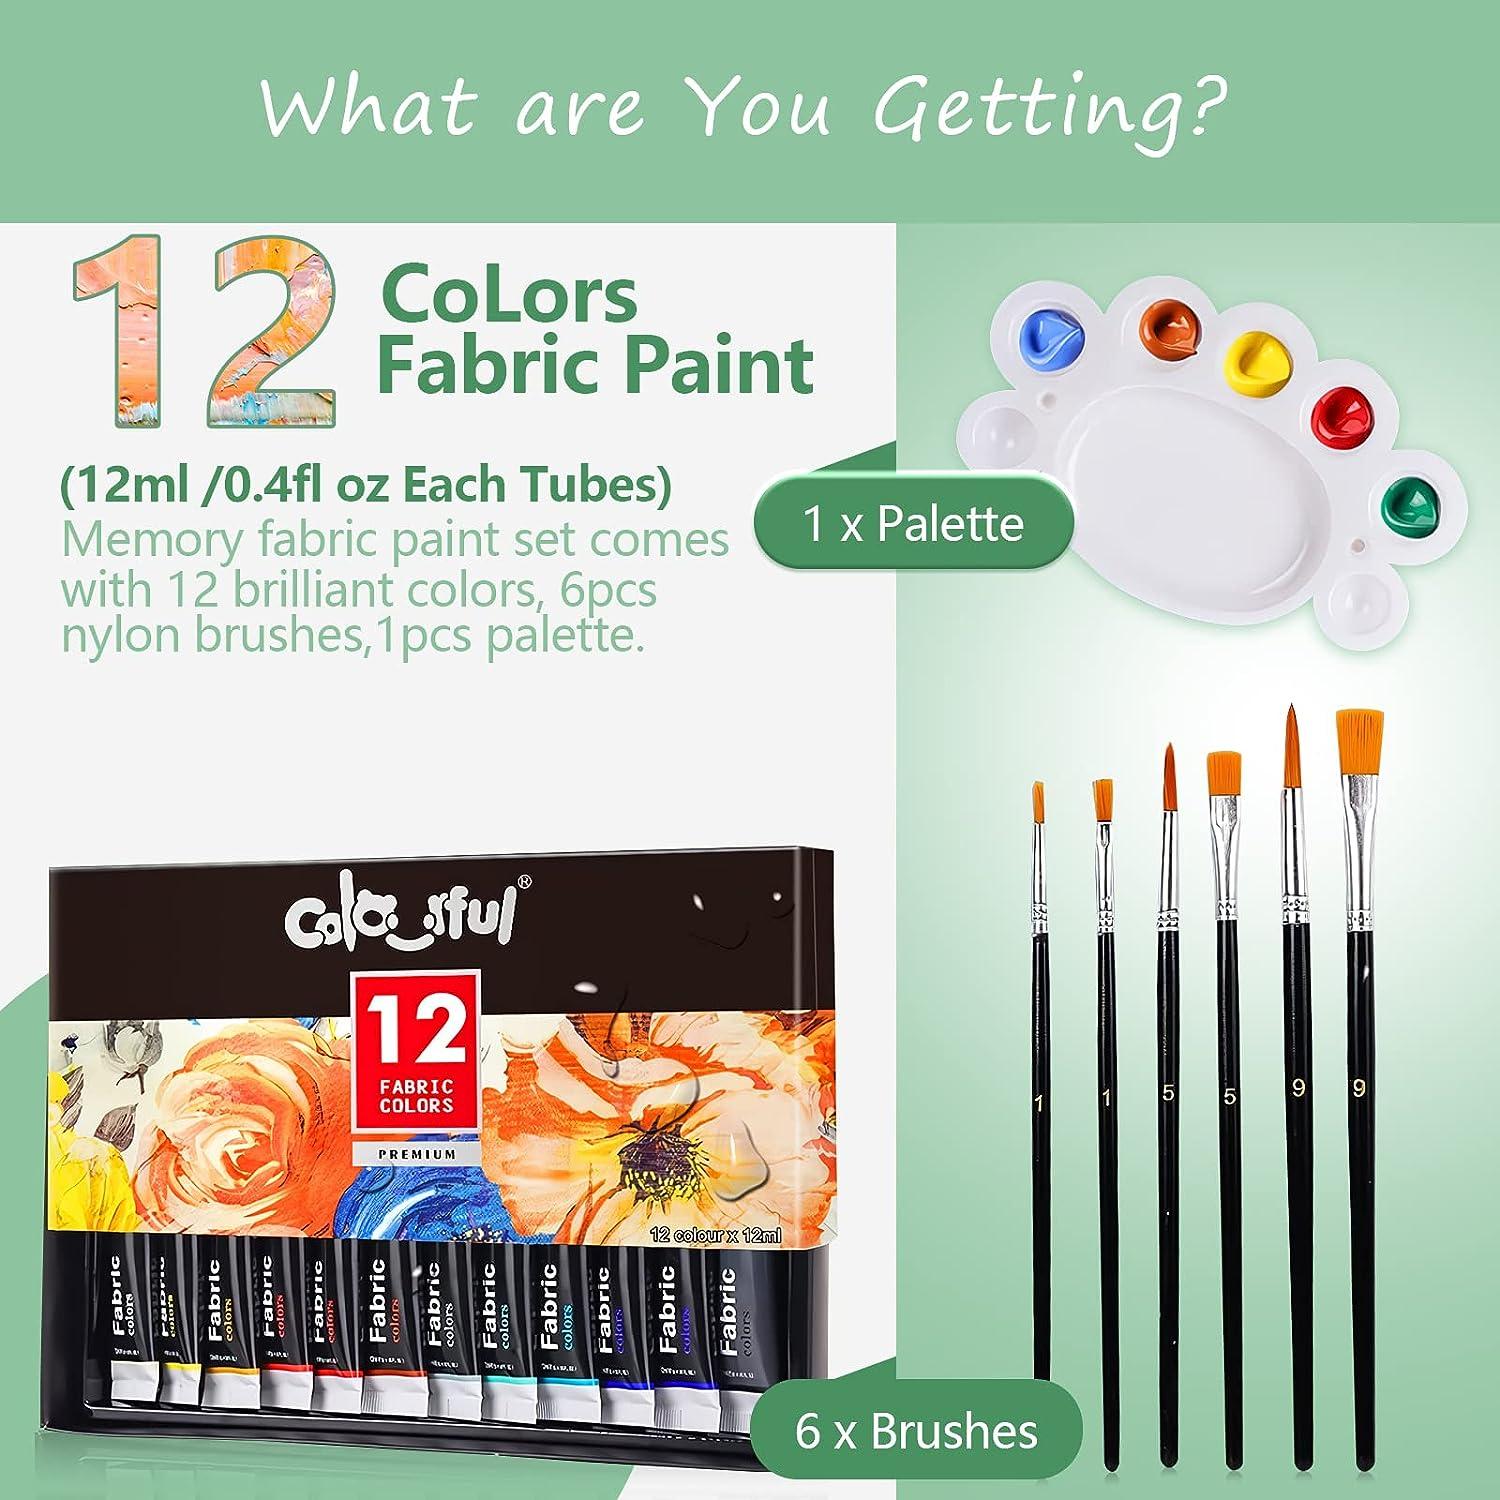 COLORFUL Fabric Paint Set for Clothes with 6 Brushes, 1 Palette, 12 Colors  Permanent Textile Puffy Paint Kit for Shoes, Canvas